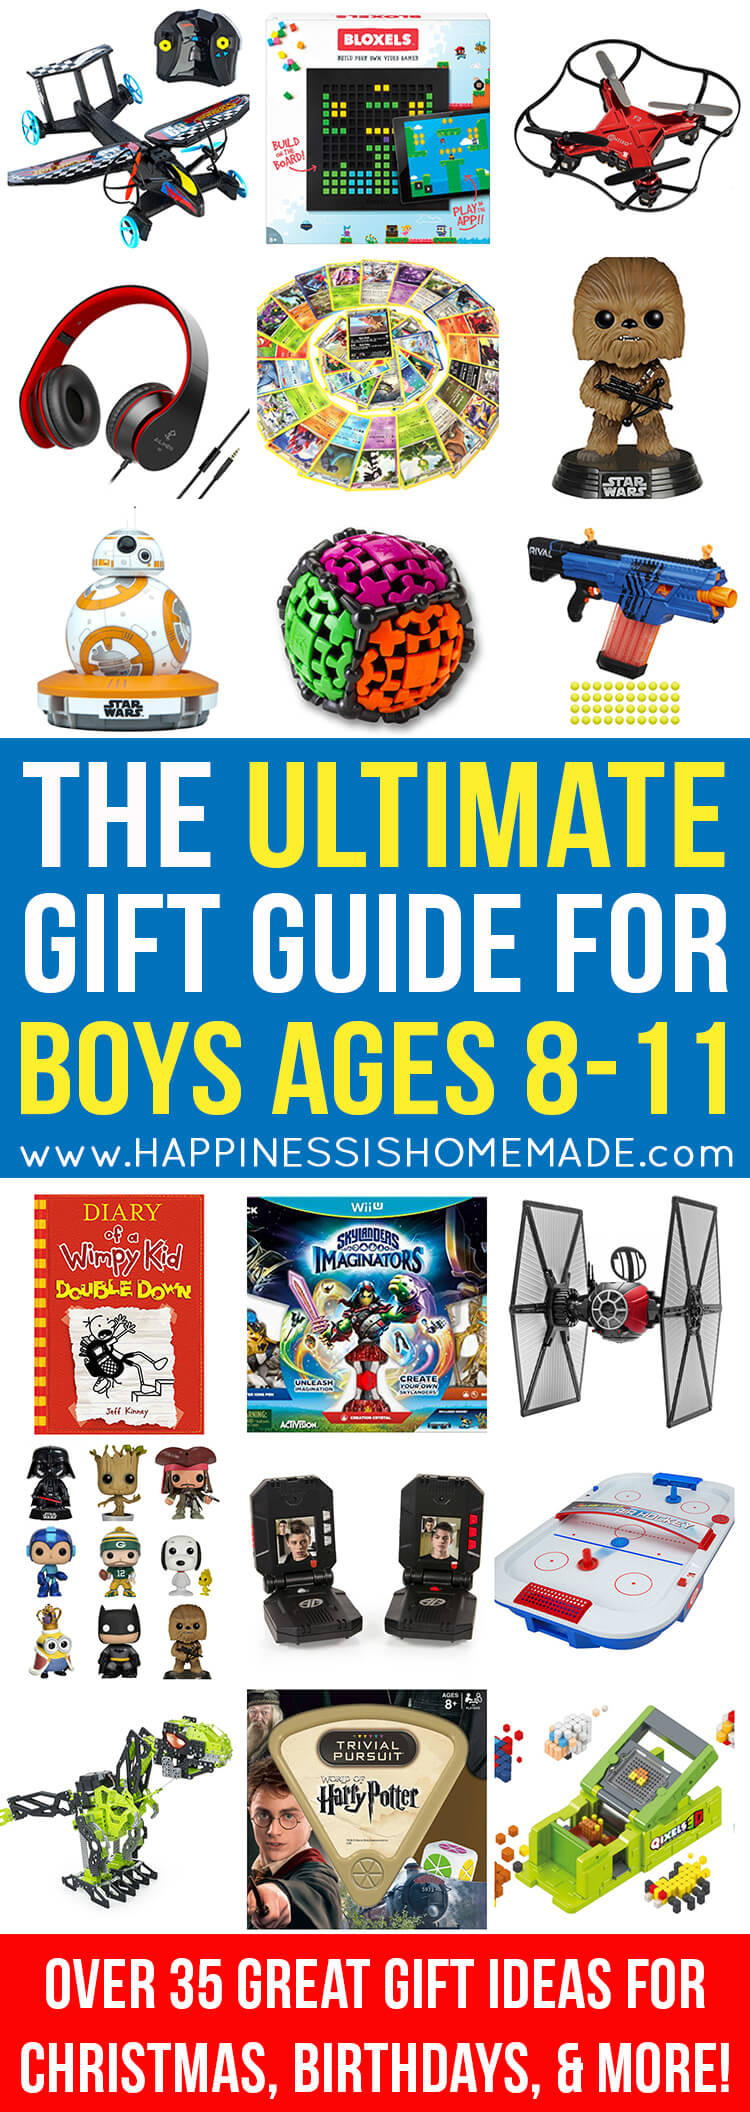 Birthday Party Ideas For Boys Age 11
 The Best Gift Ideas for Boys Ages 8 11 Happiness is Homemade